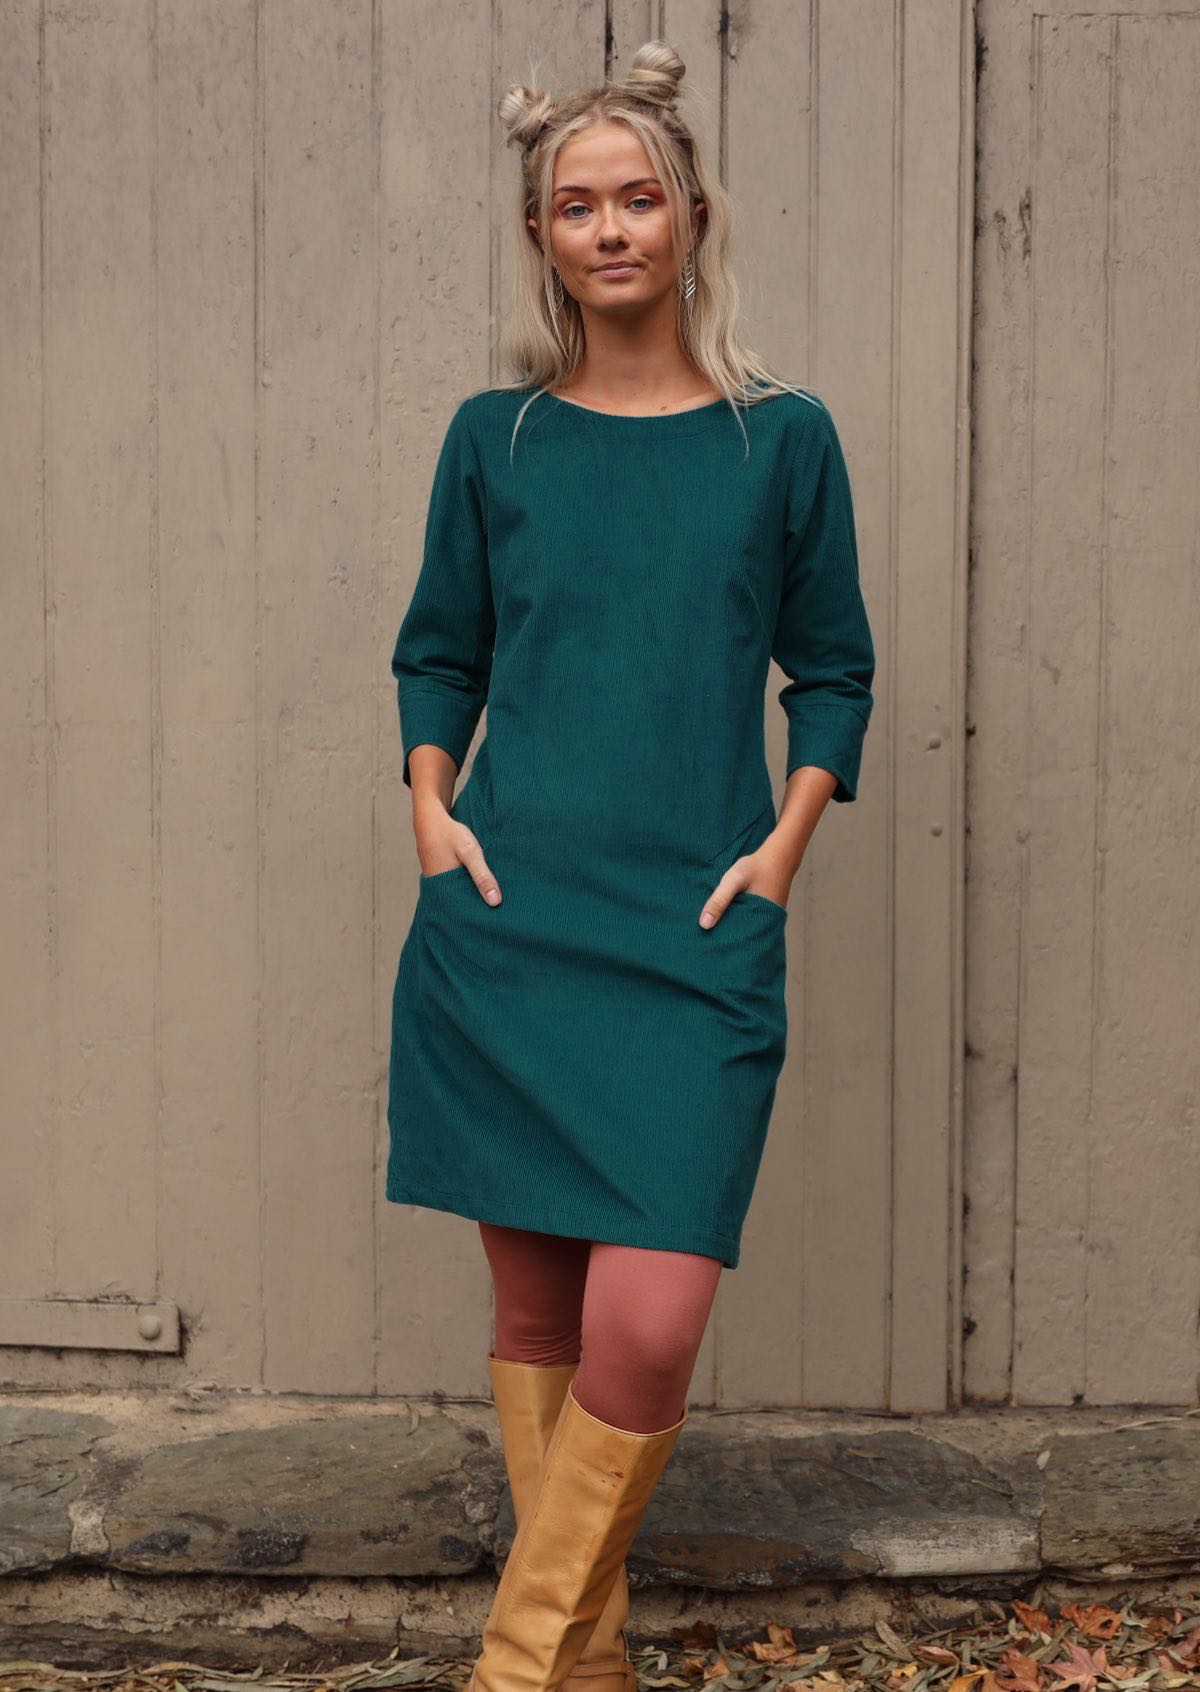 Corduroy dress with 3/4 sleeves and side zip